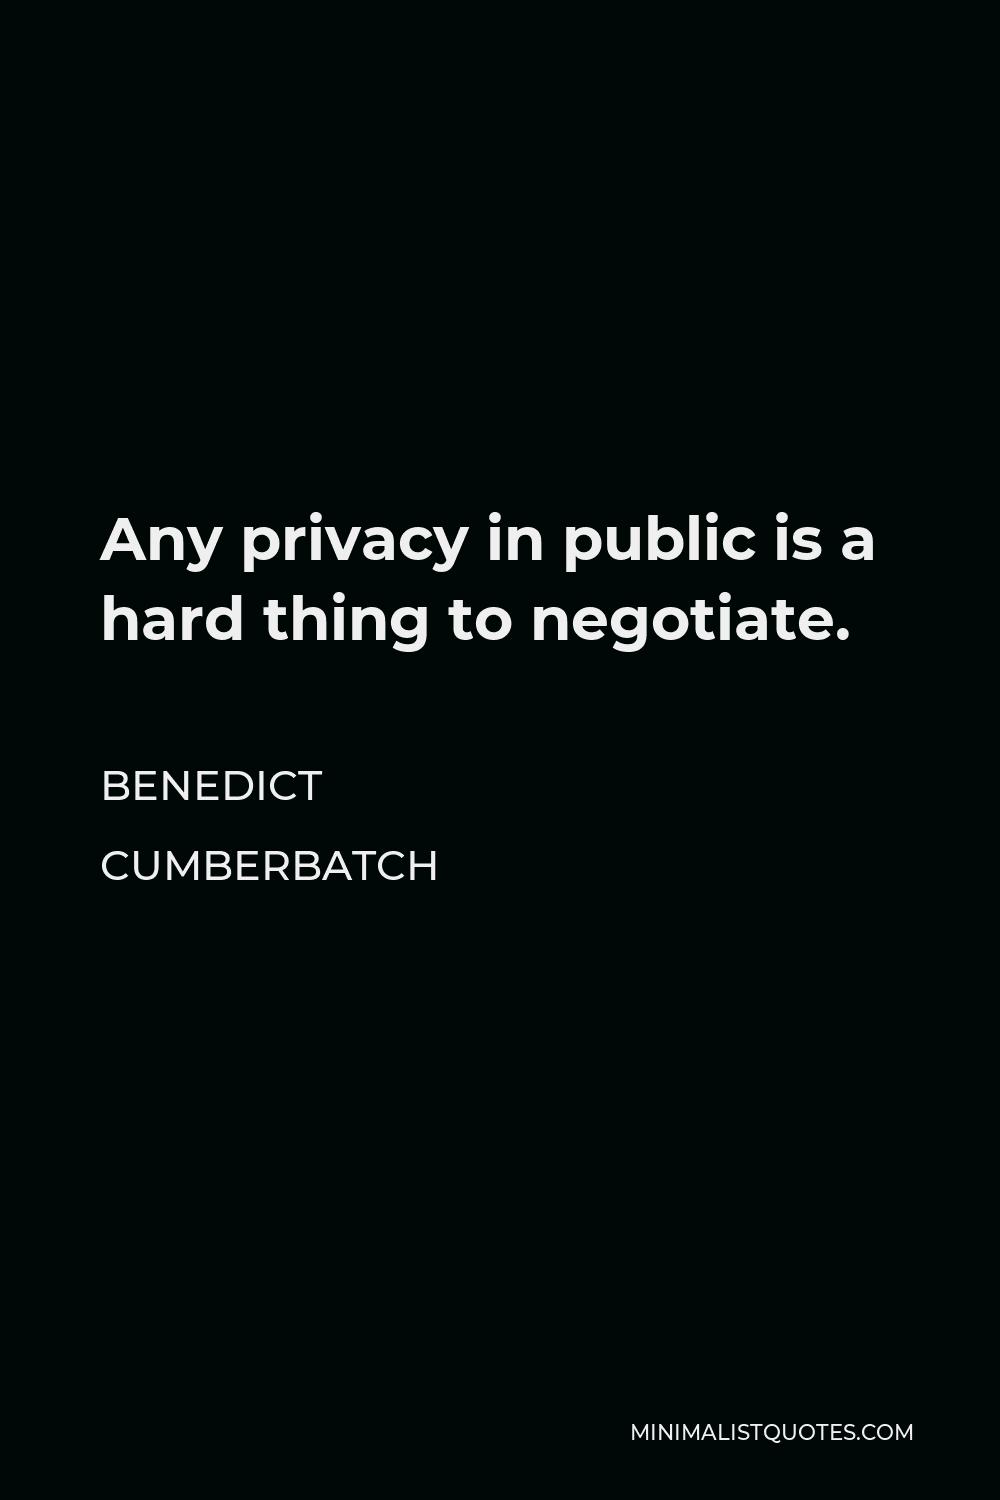 Benedict Cumberbatch Quote - Any privacy in public is a hard thing to negotiate.